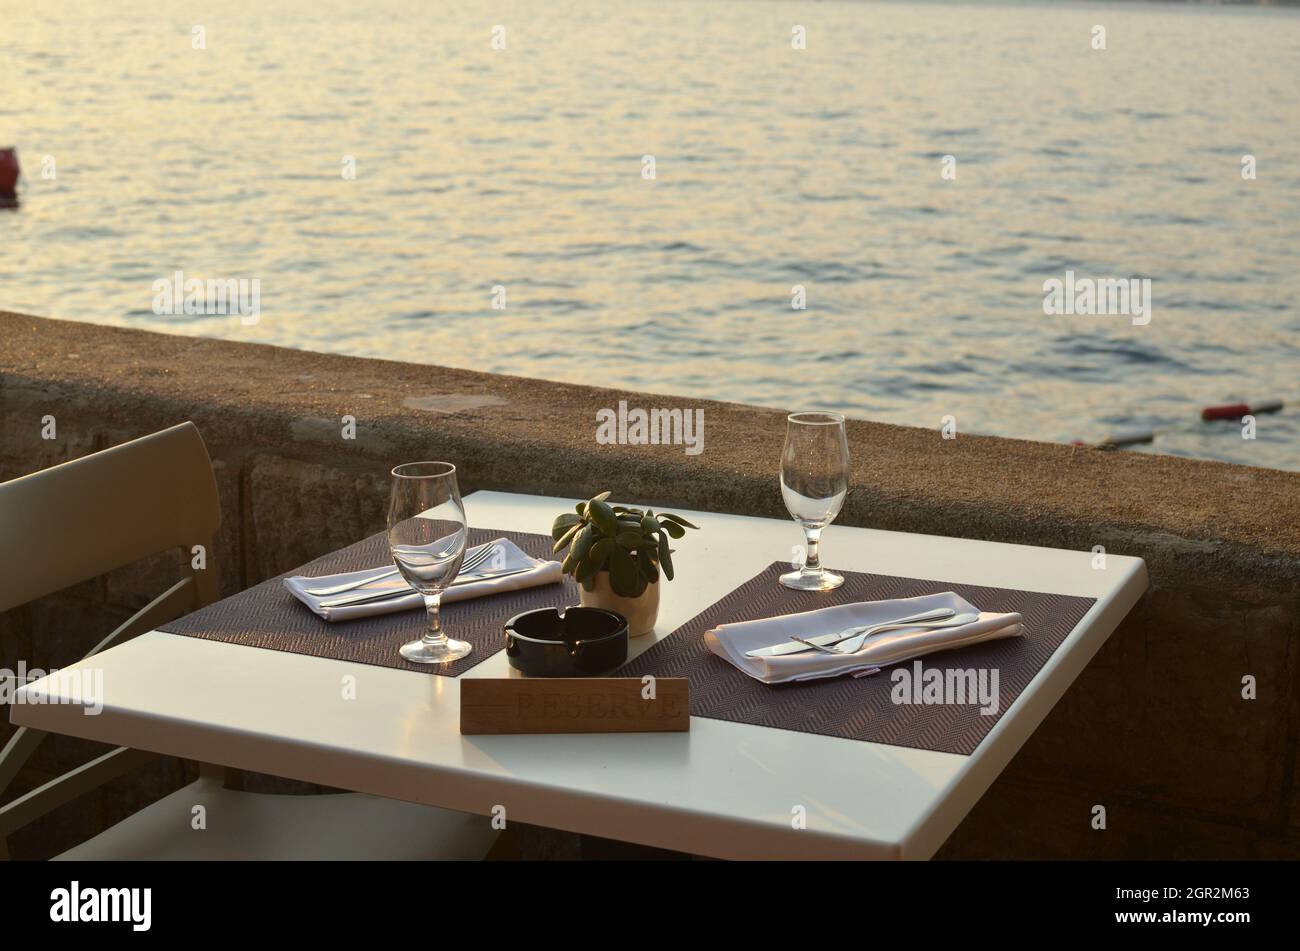 Set Table Of A Restaurant With A Sea View Stock Photo